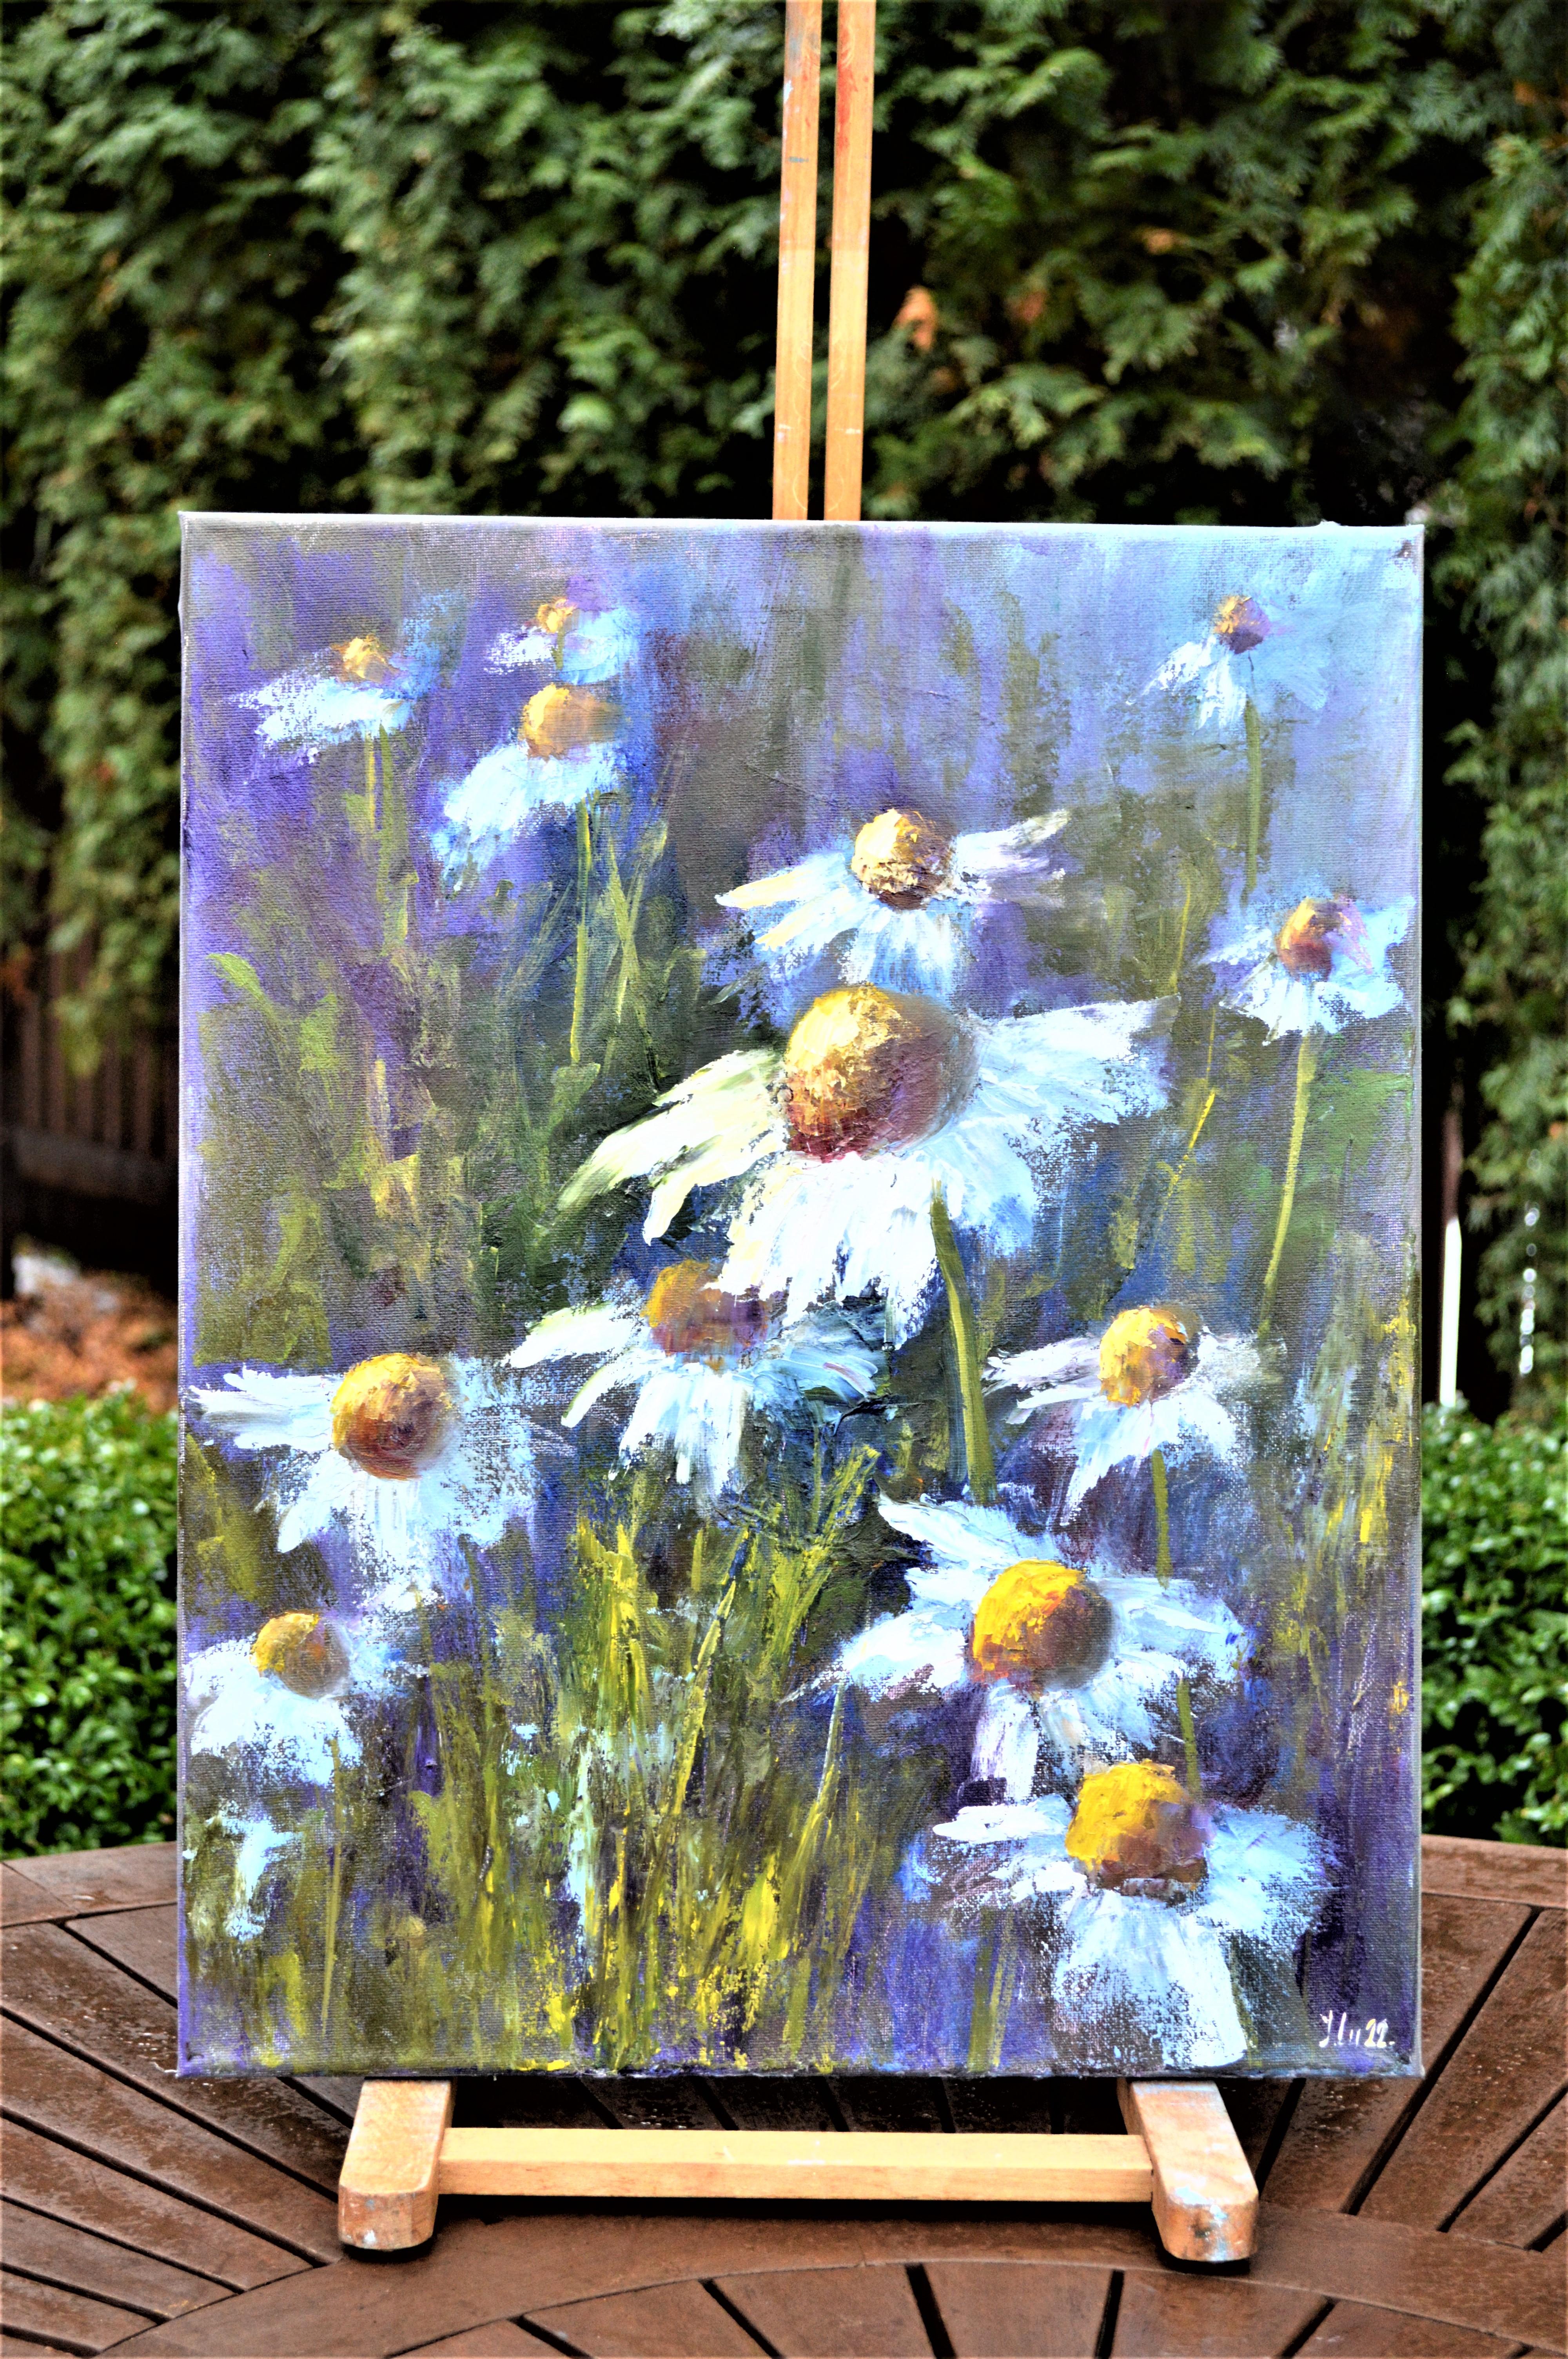 In crafting this piece, I unleashed my passion for nature's unassuming beauty onto the canvas. Each stroke of oil paint embodies the serene and gentle vitality of a blooming field. Through an interplay of expressionism, realism, and a touch of